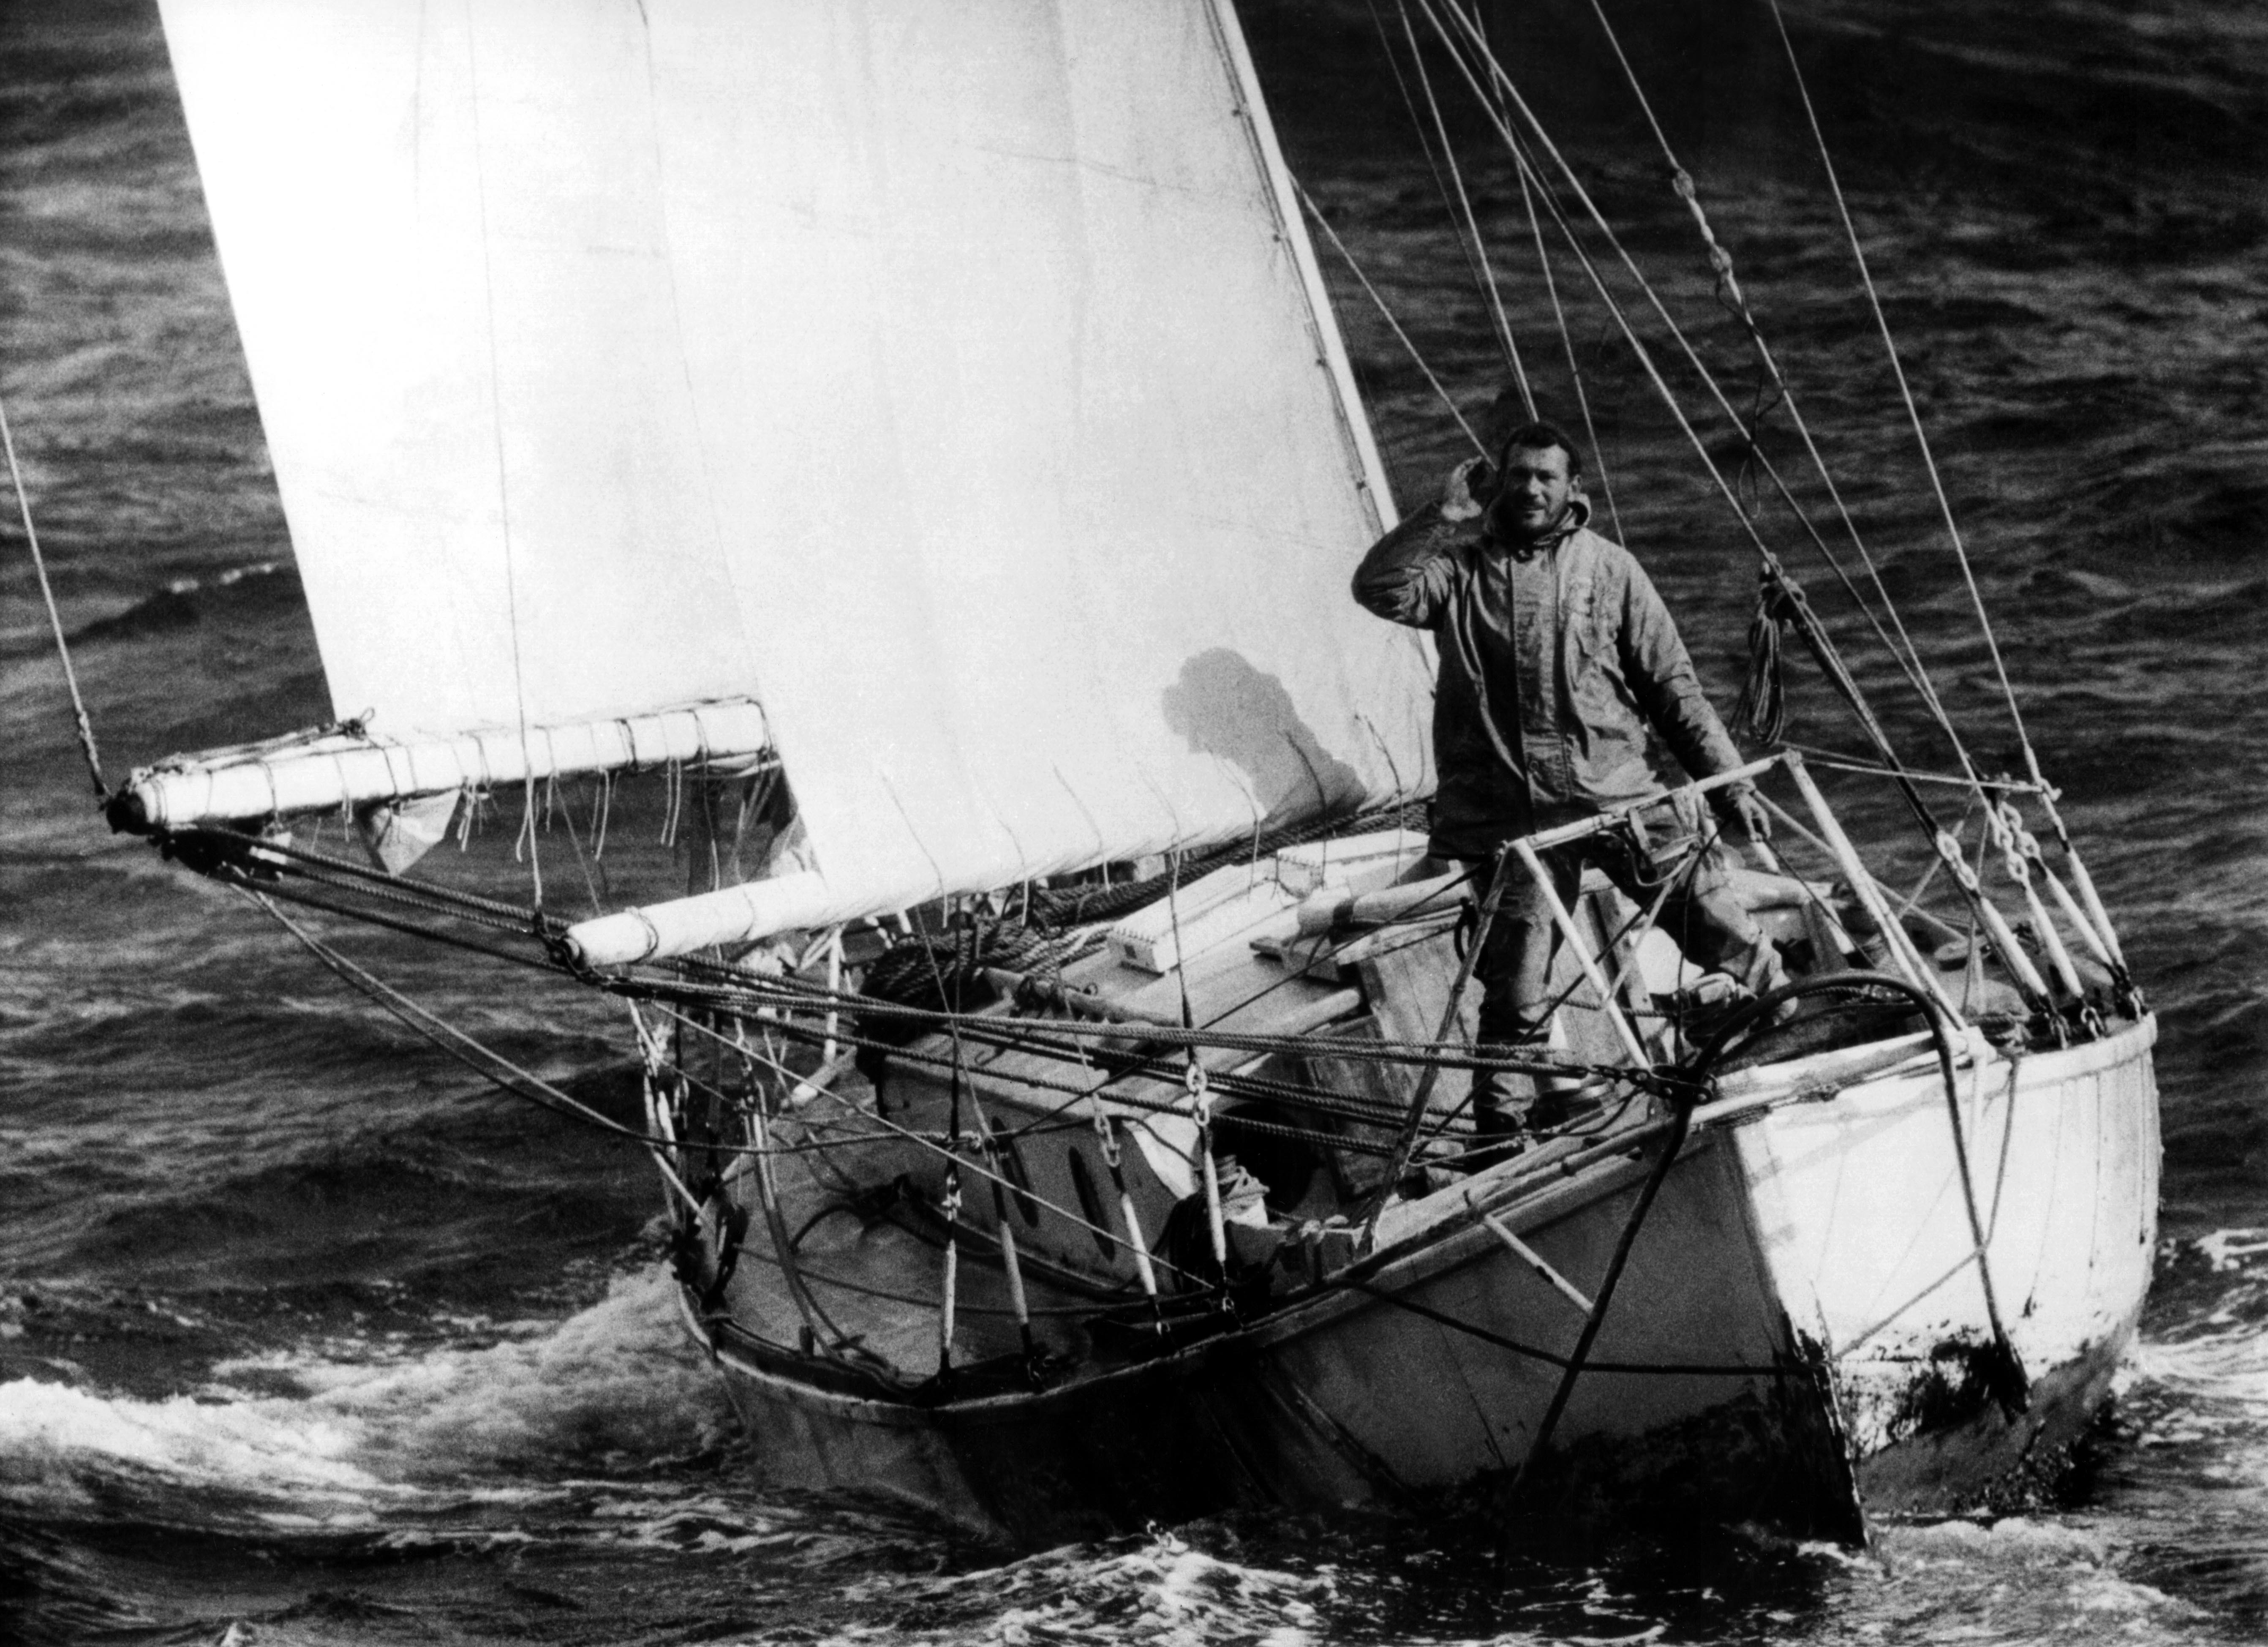 The sole finisher, Sir Robin crossed the finish line off Falmouth after 312 days at sea.